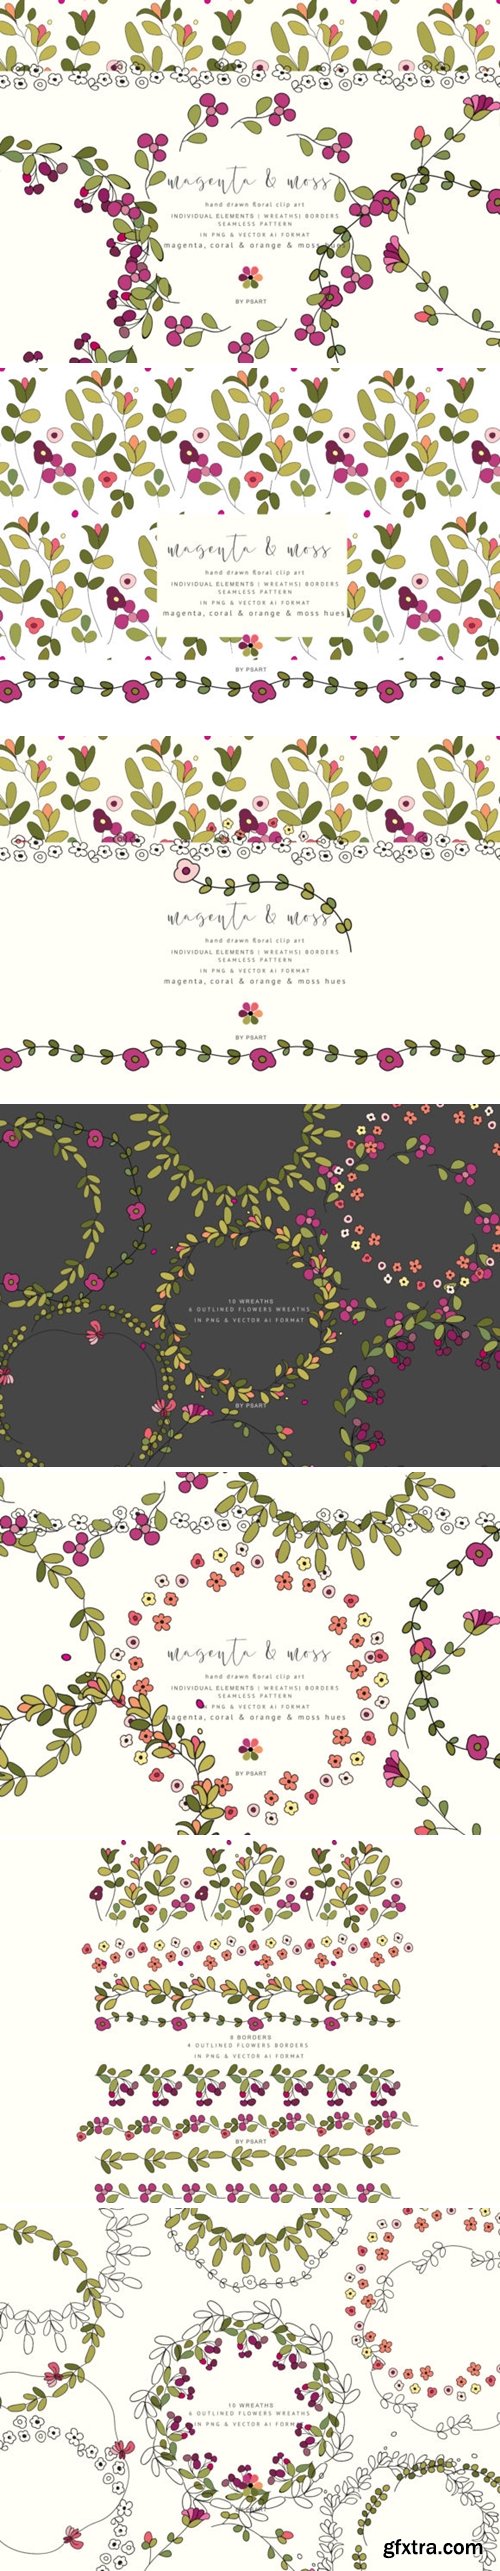 Colorful Hand-Draw Flowers Clipart 1348608